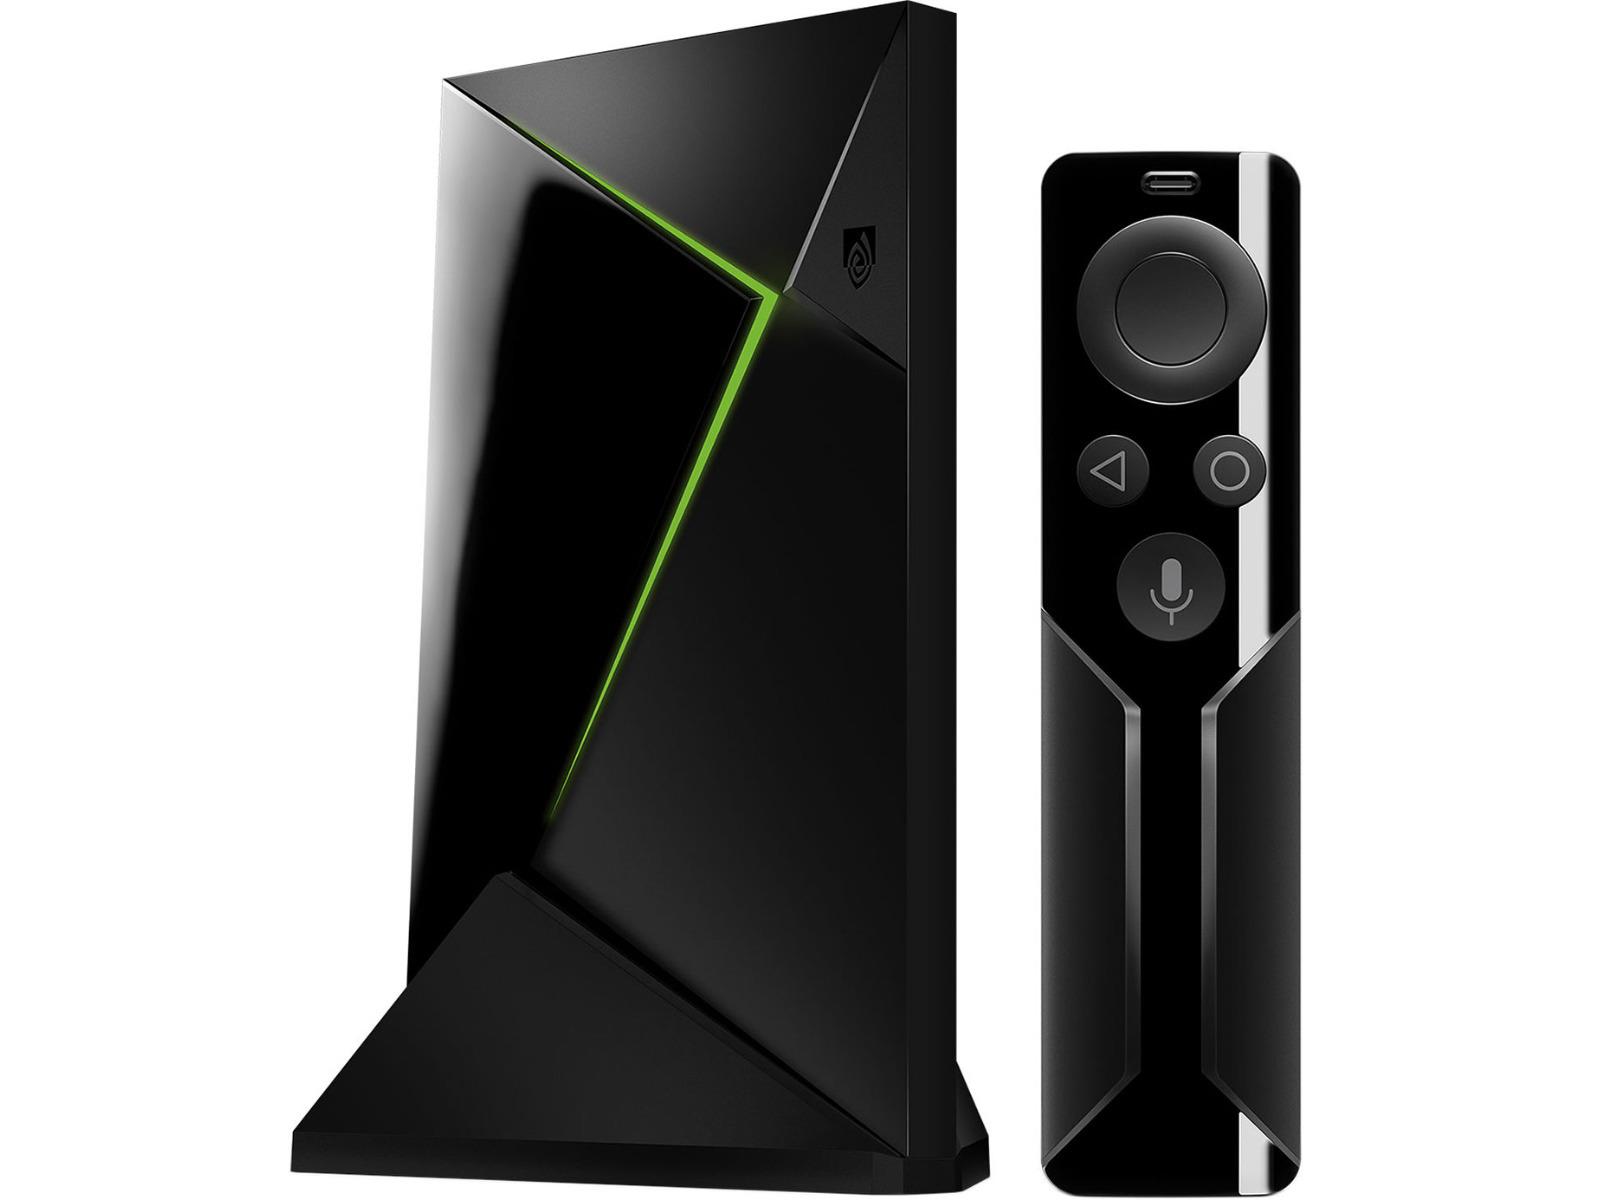 NVIDIA Reportedly Has Two SHIELD TV 4K Streamer Successors Primed